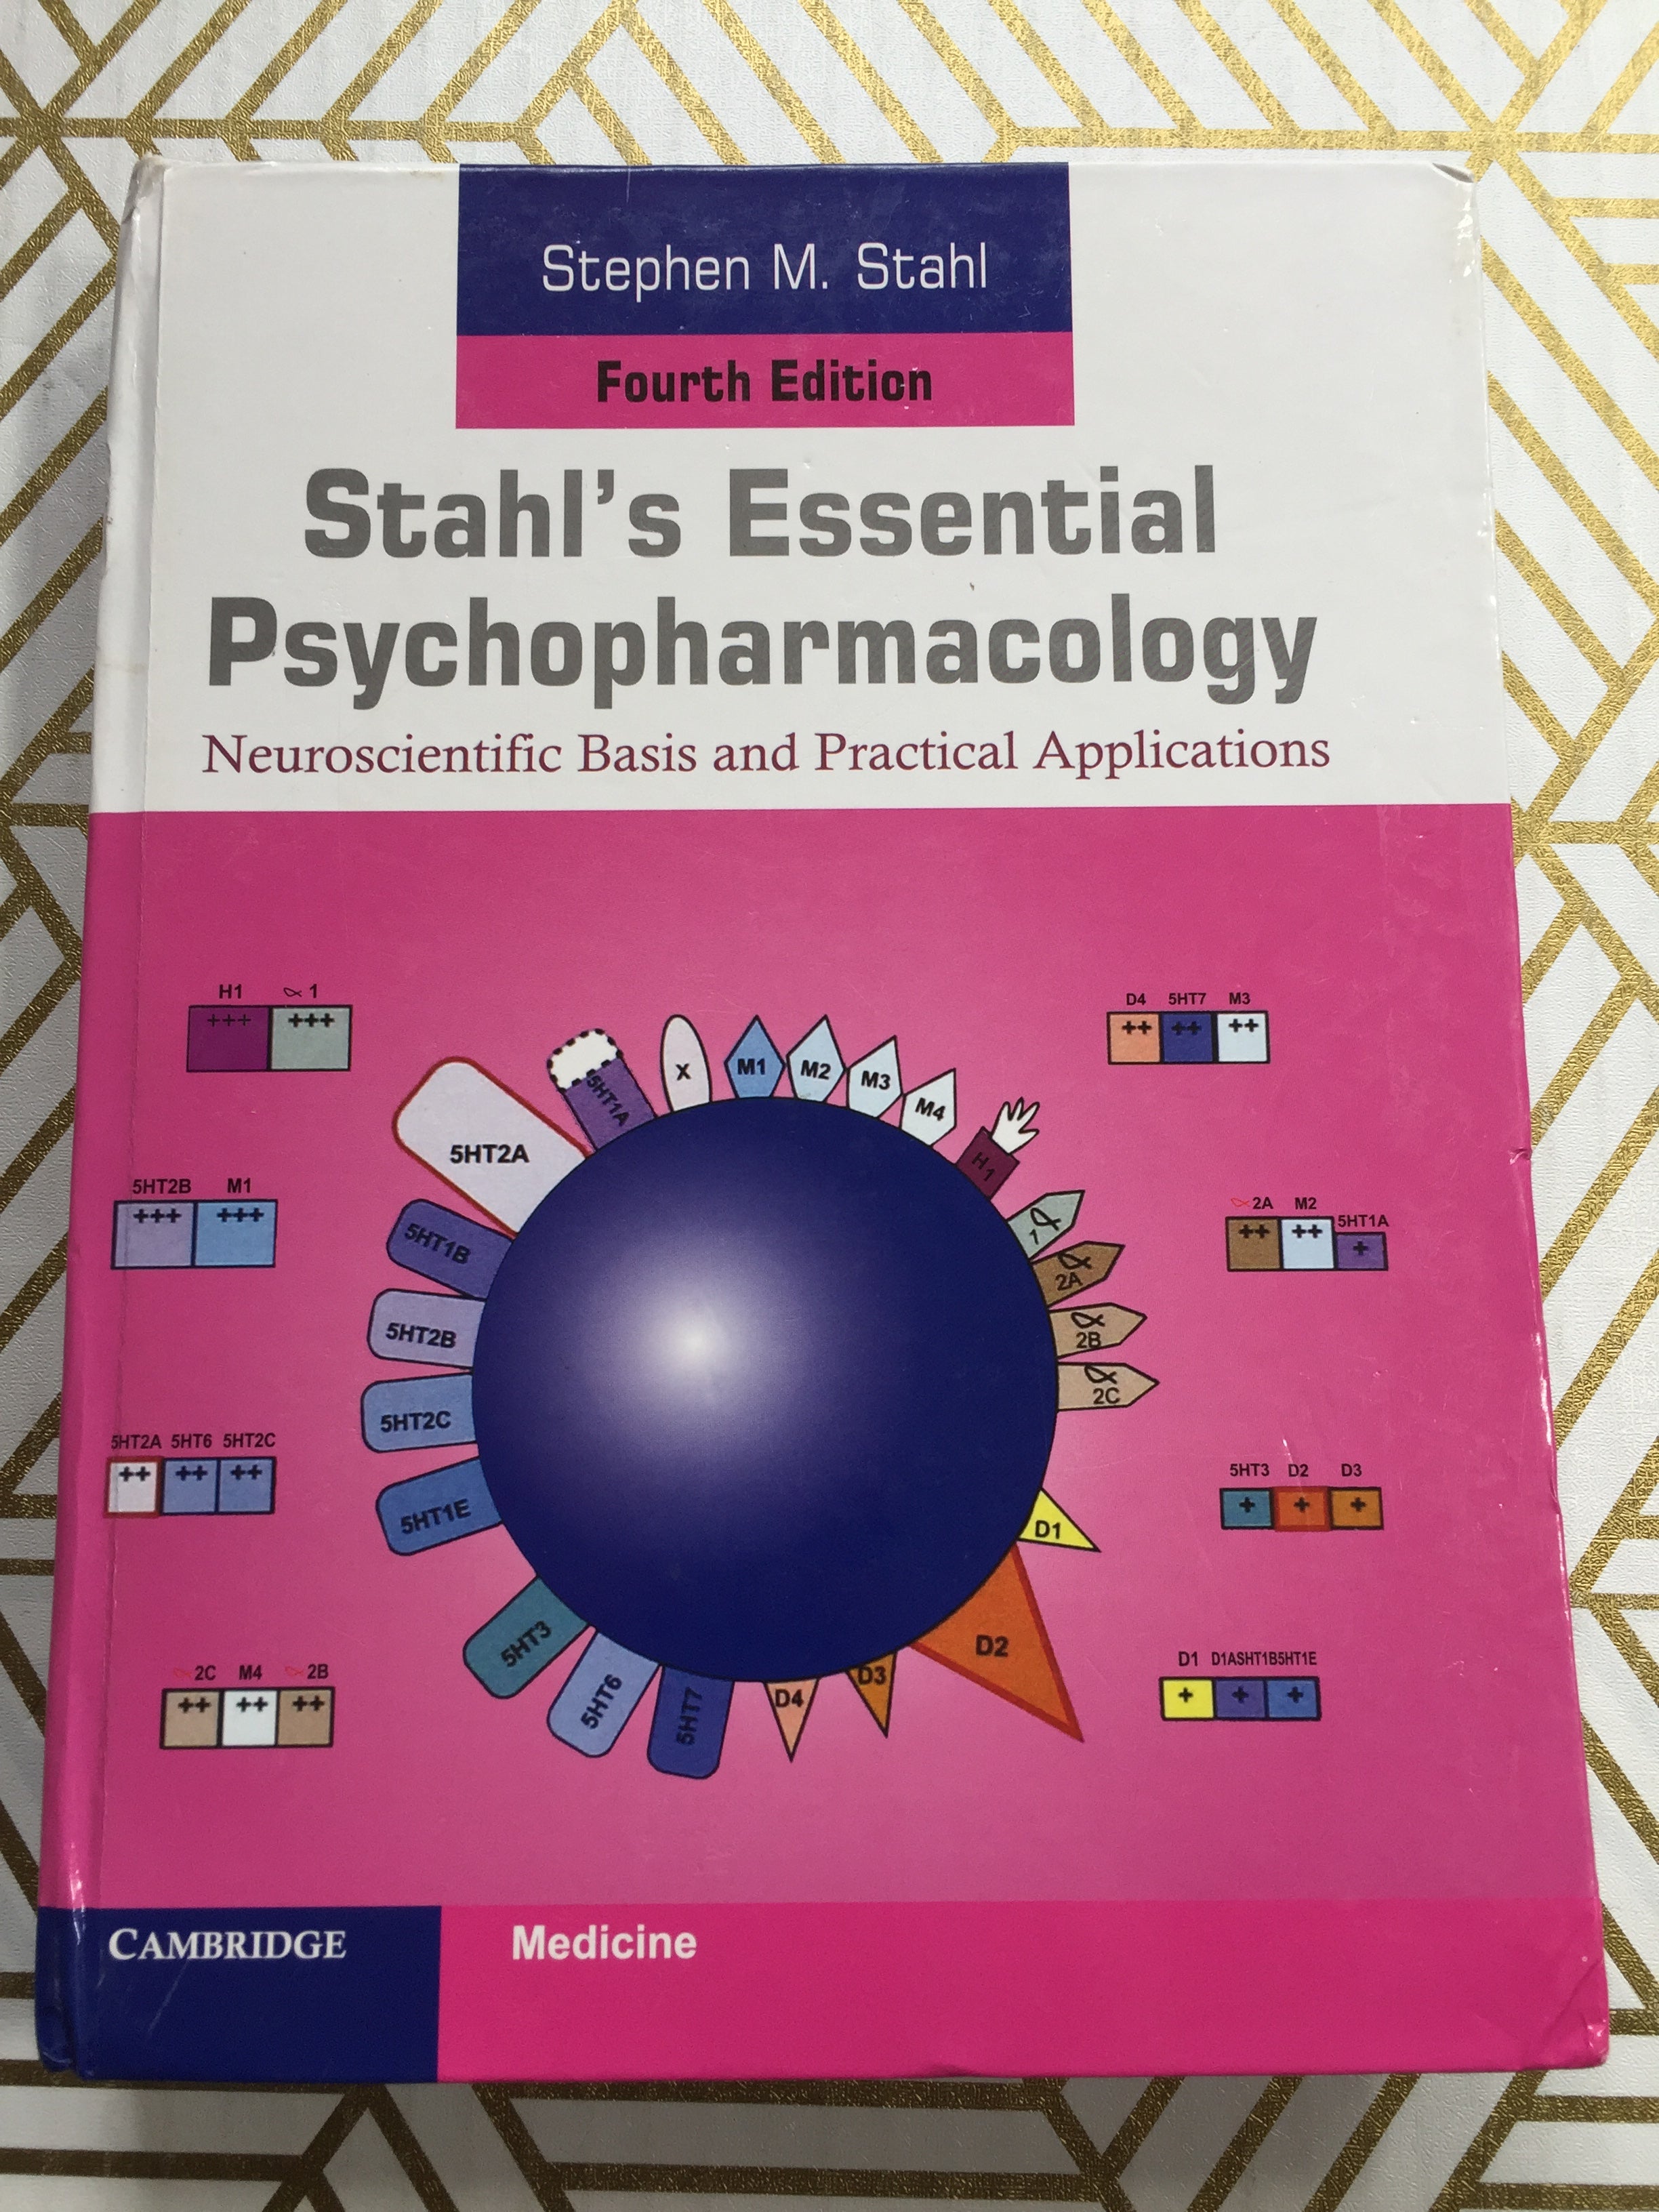 Stahl's Essential Psychopharmacology: Neuroscientific Basis and Practical Applications (8045389709550)